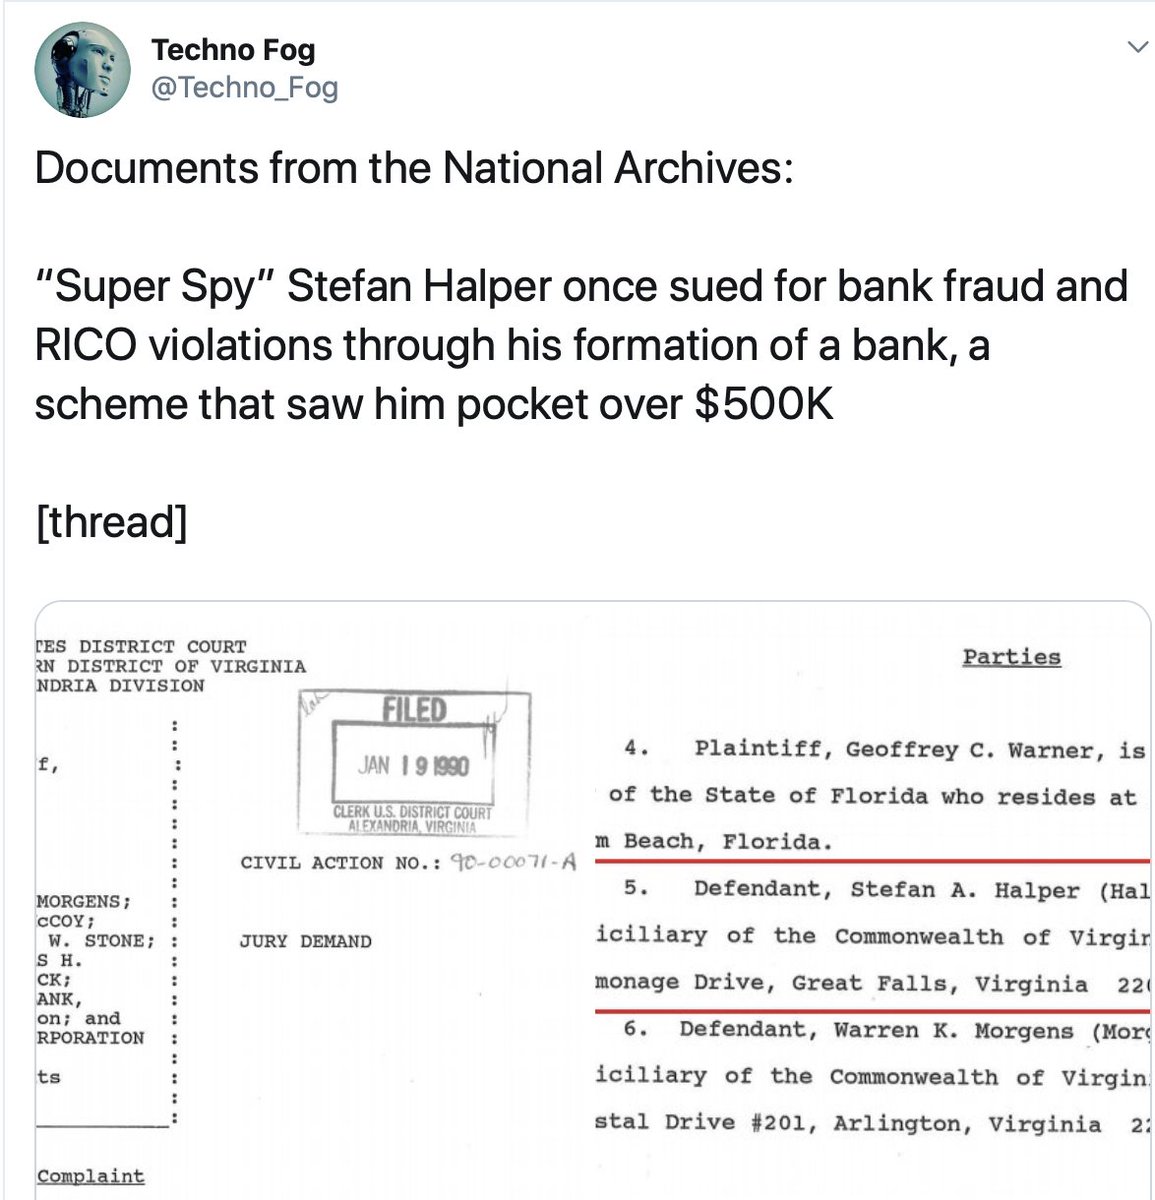 Halper was "sued for bank fraud, RICO violations through his formation of a bank, a scheme that saw him pocket over $500K" Halper settled out of court. "It would have subjected Halper to federal charges for wire fraud, bank fraud, perjury, etc. But Halper was never prosecuted"/7